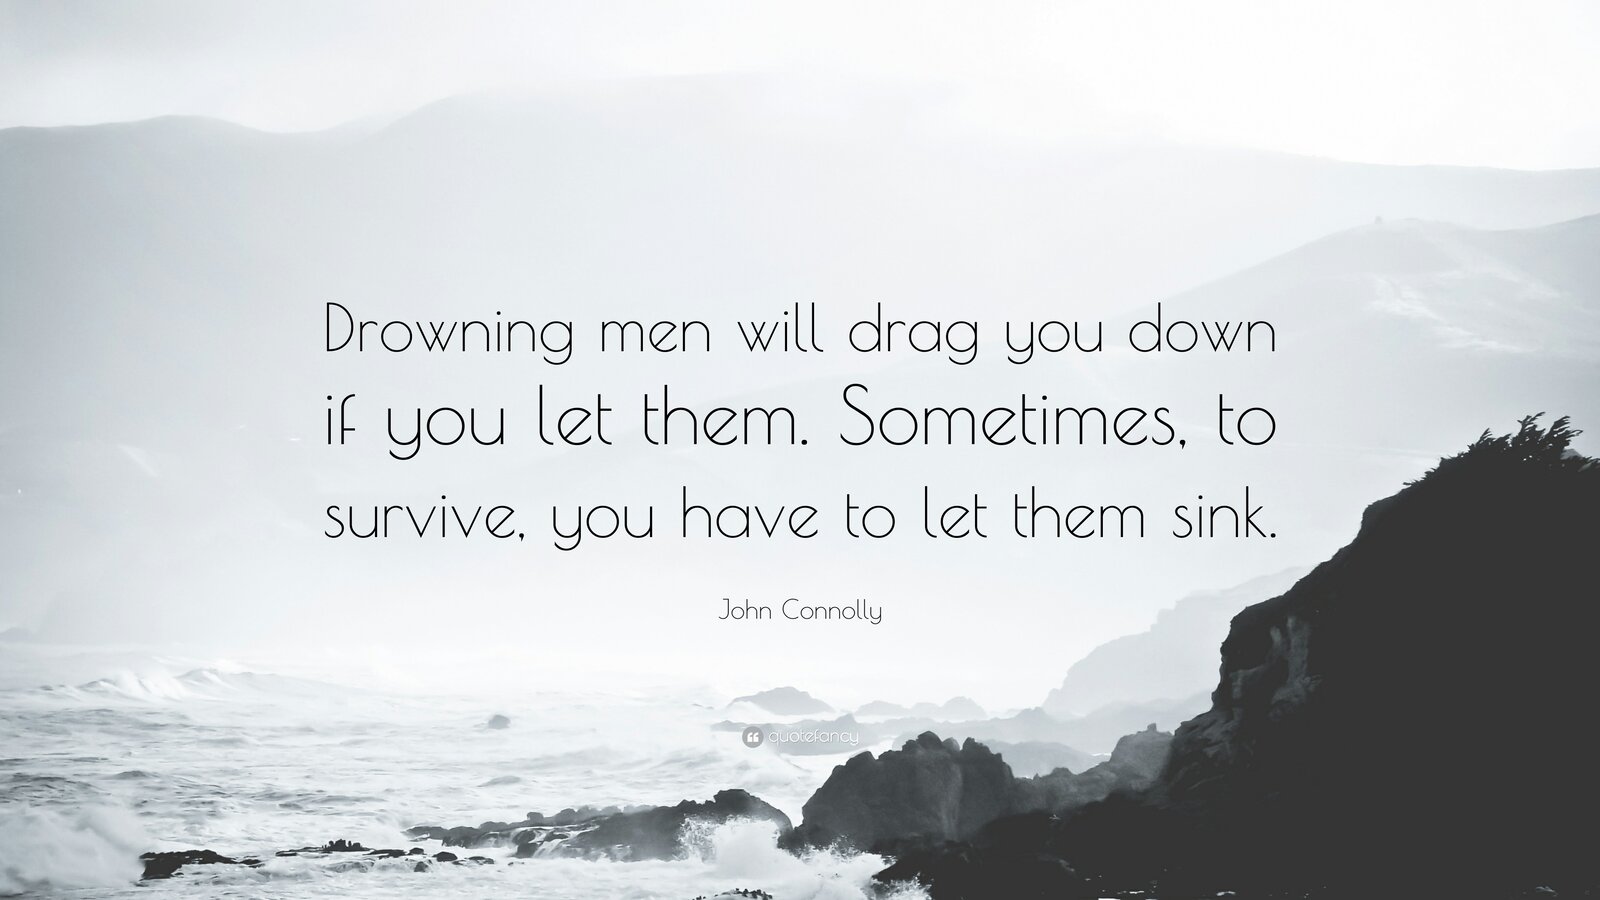 6528764-John-Connolly-Quote-Drowning-men-will-drag-you-down-if-you-let.jpg